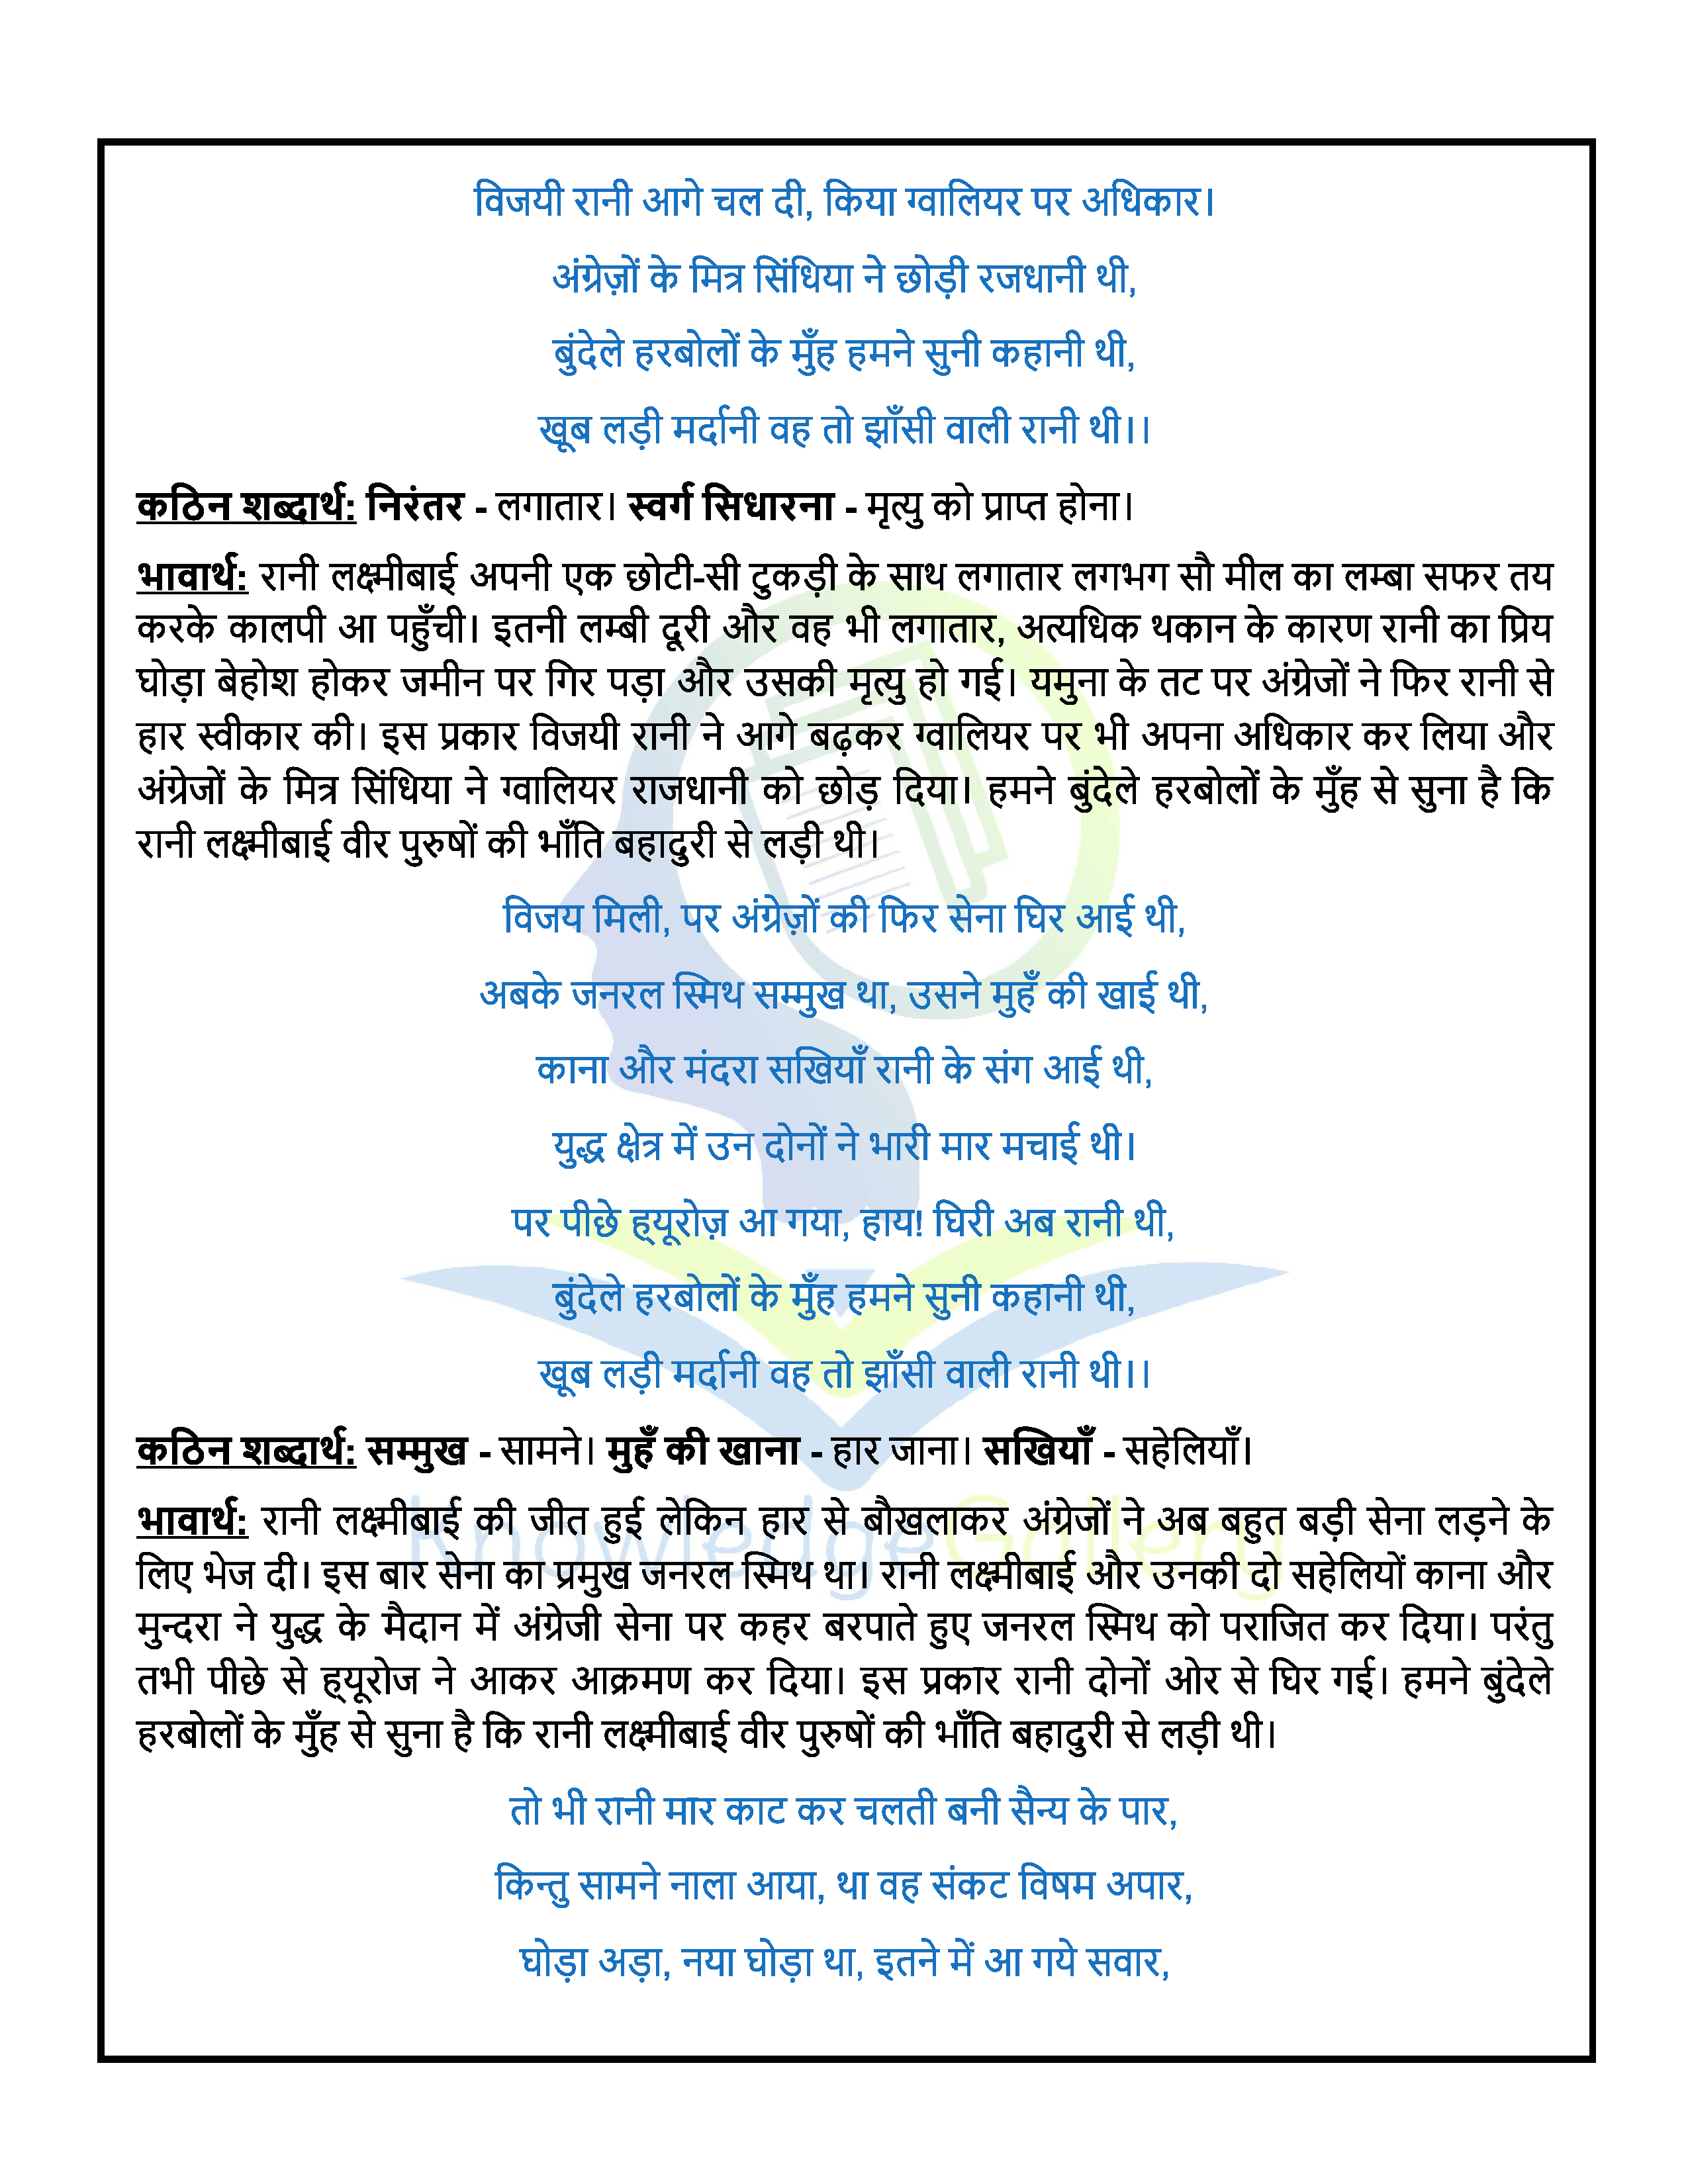 NCERT Solution For Class 6 Hindi Chapter 10 part 8